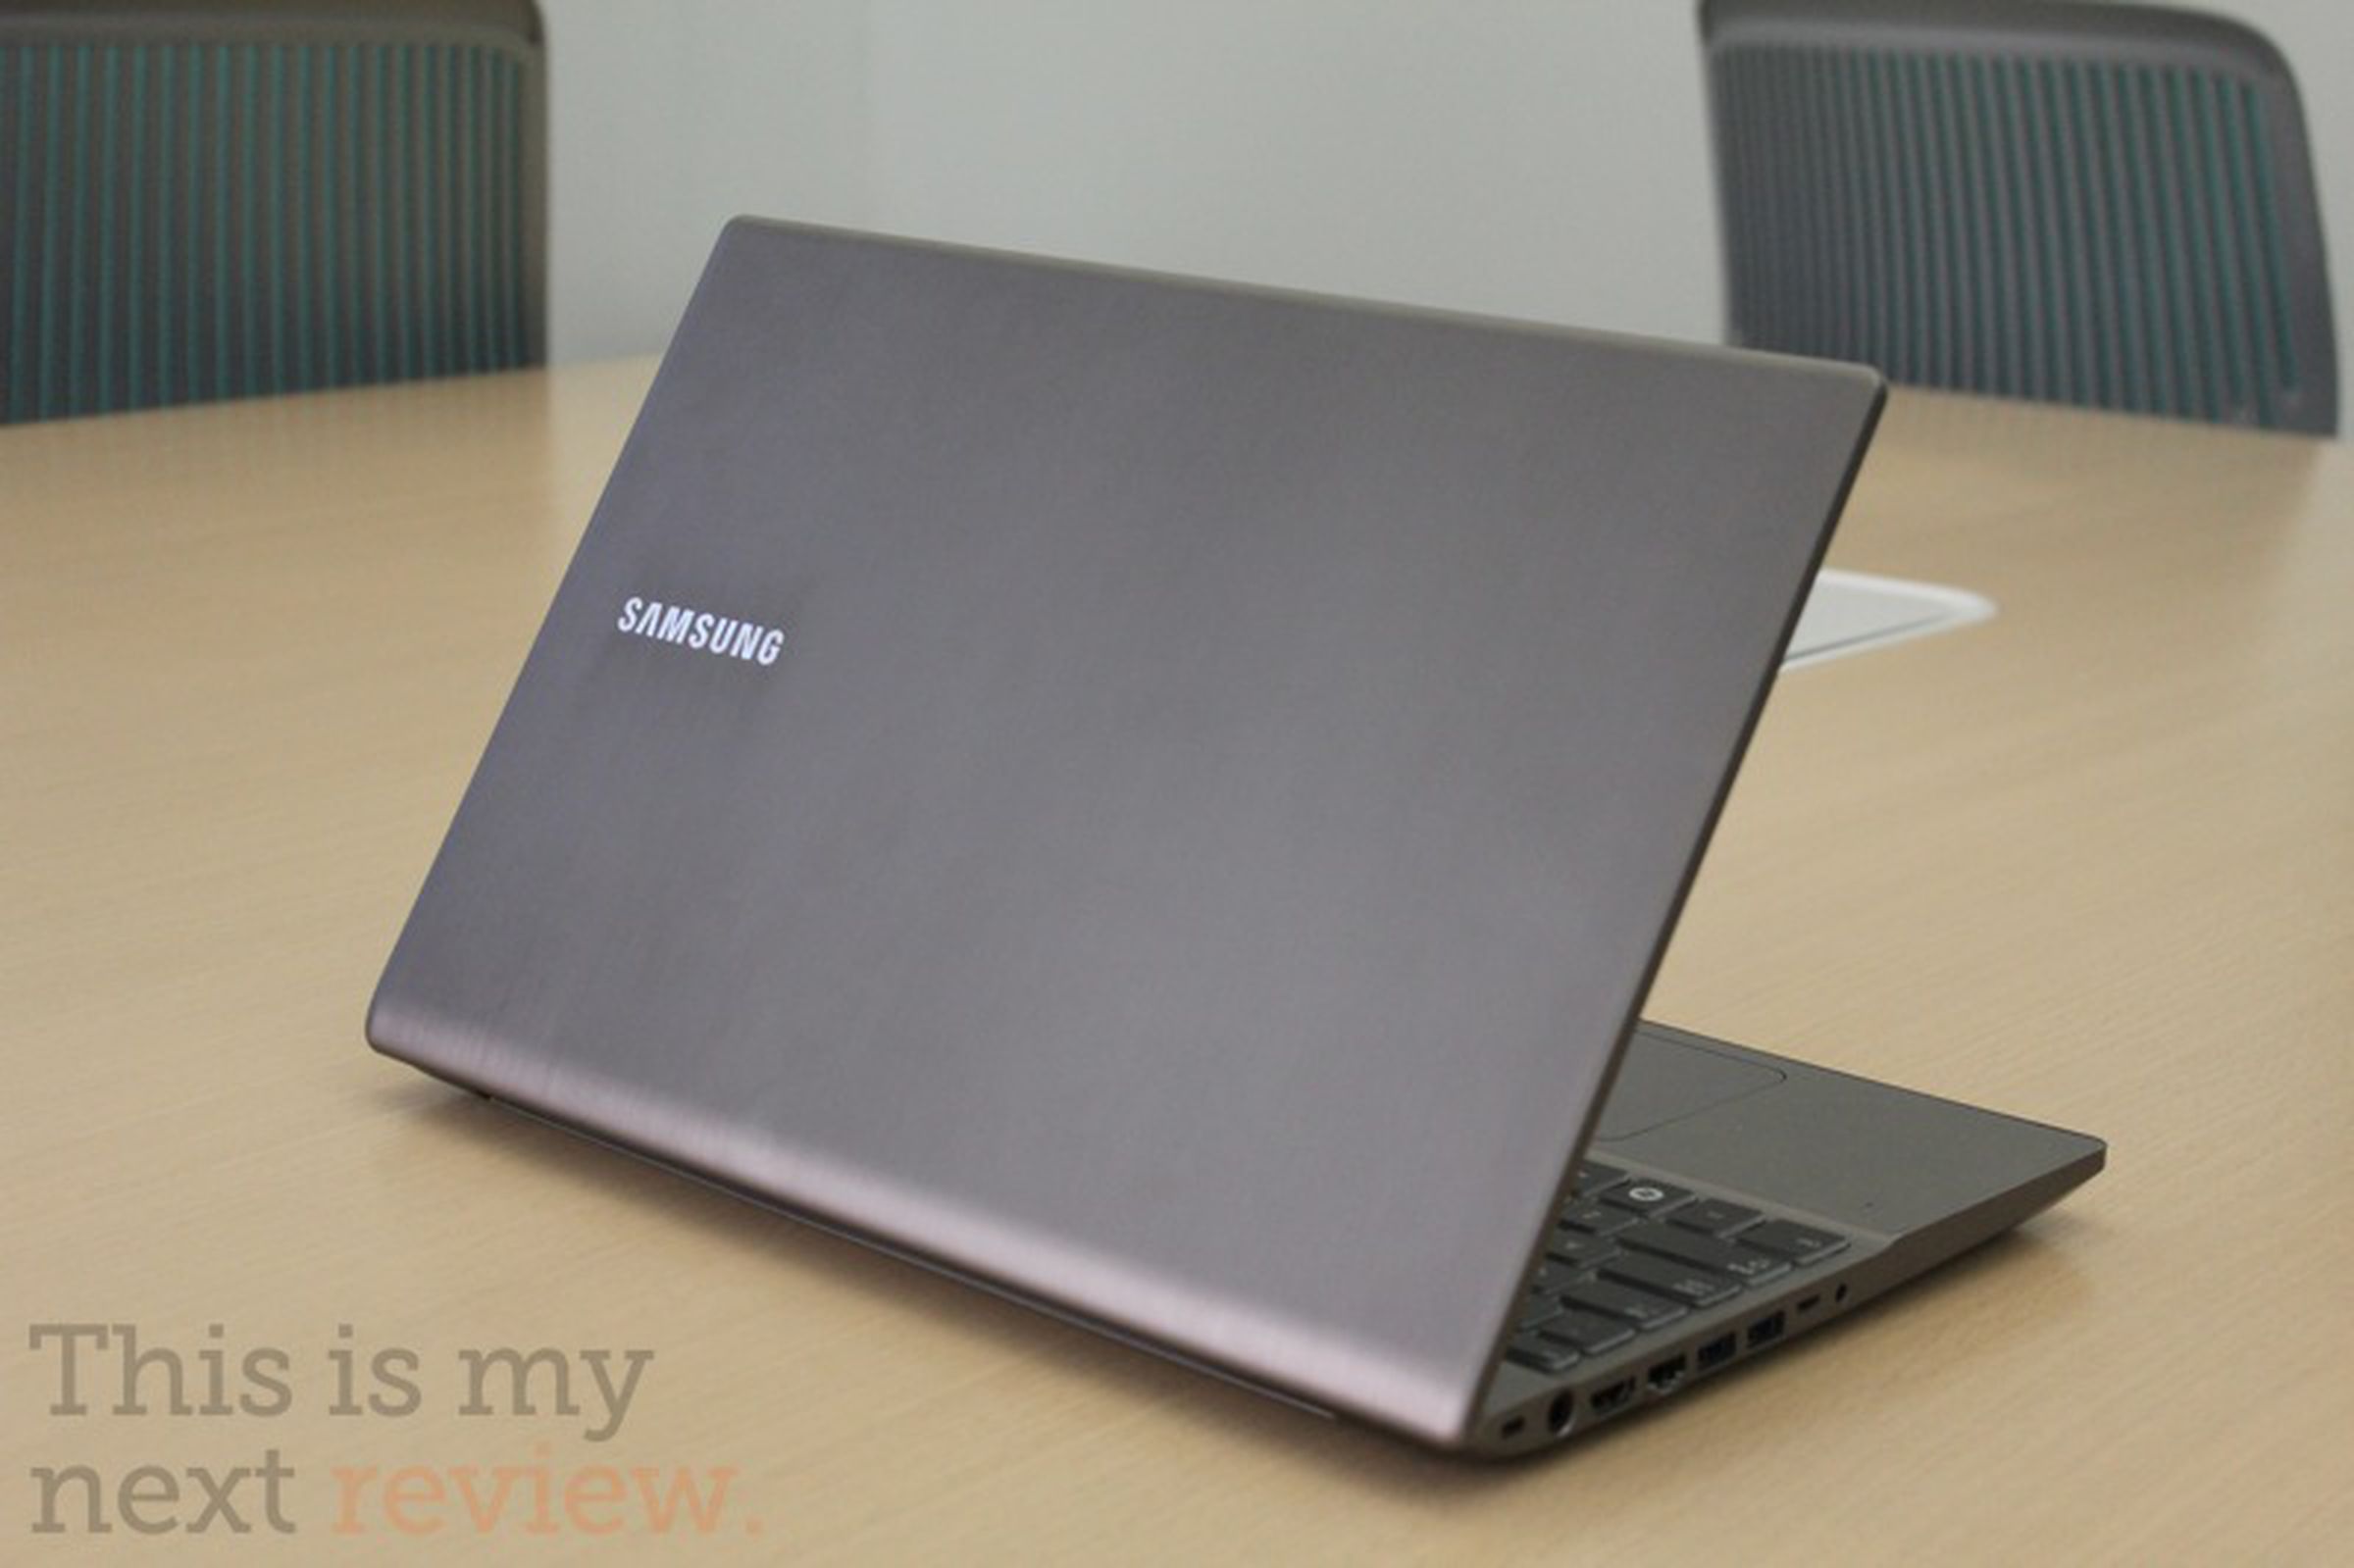 Samsung Series 7: aluminum covers, quad-core Core i7 power, and AMD graphics starting at $999